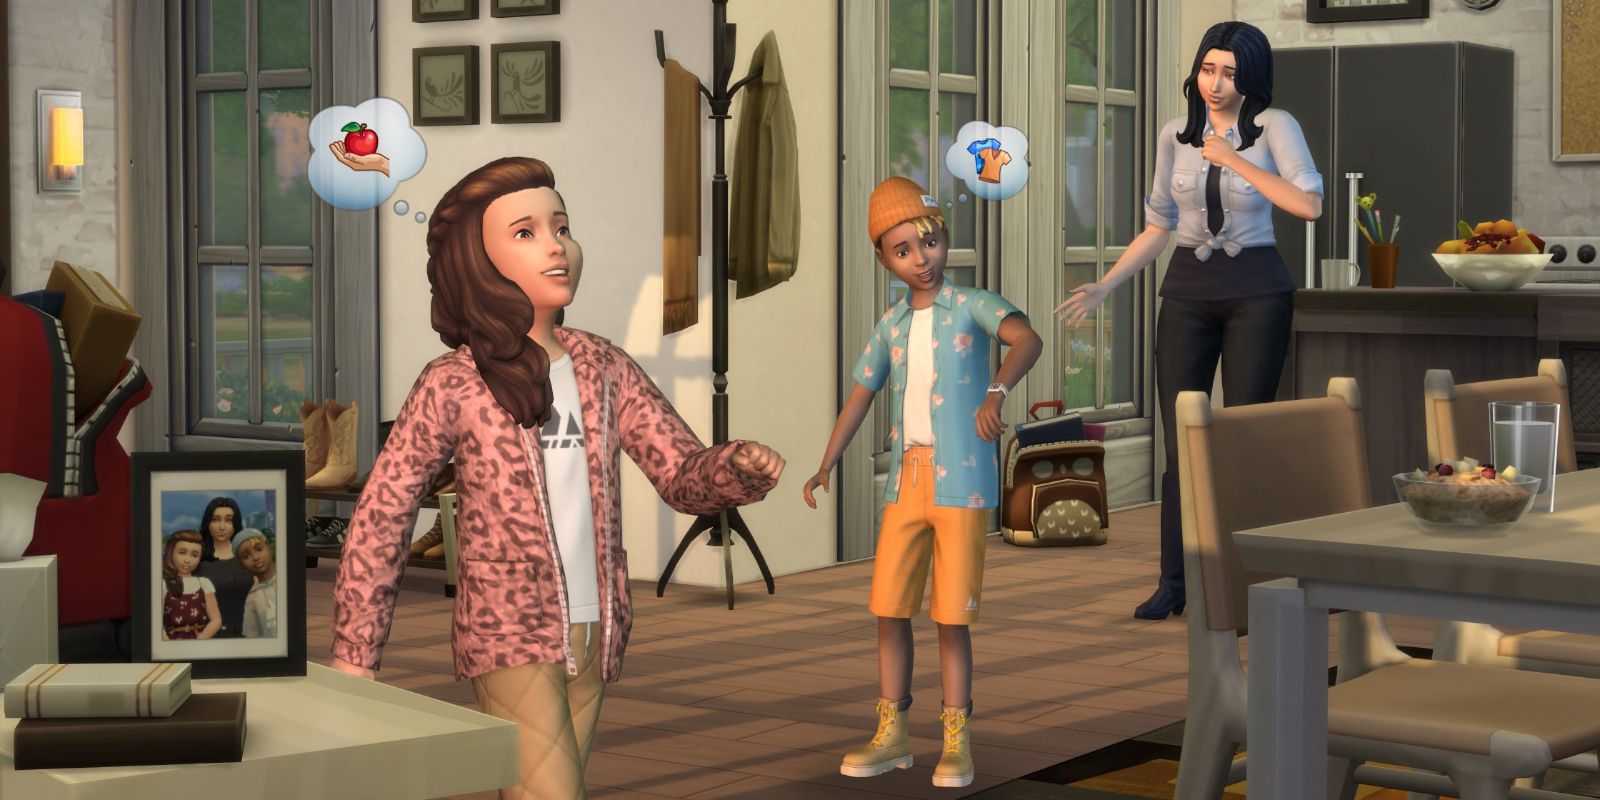 The Sims 4 promotional image for the First Fits Kit, showing two children wearing new outfits while an adult Sim looks on heartwarmingly.